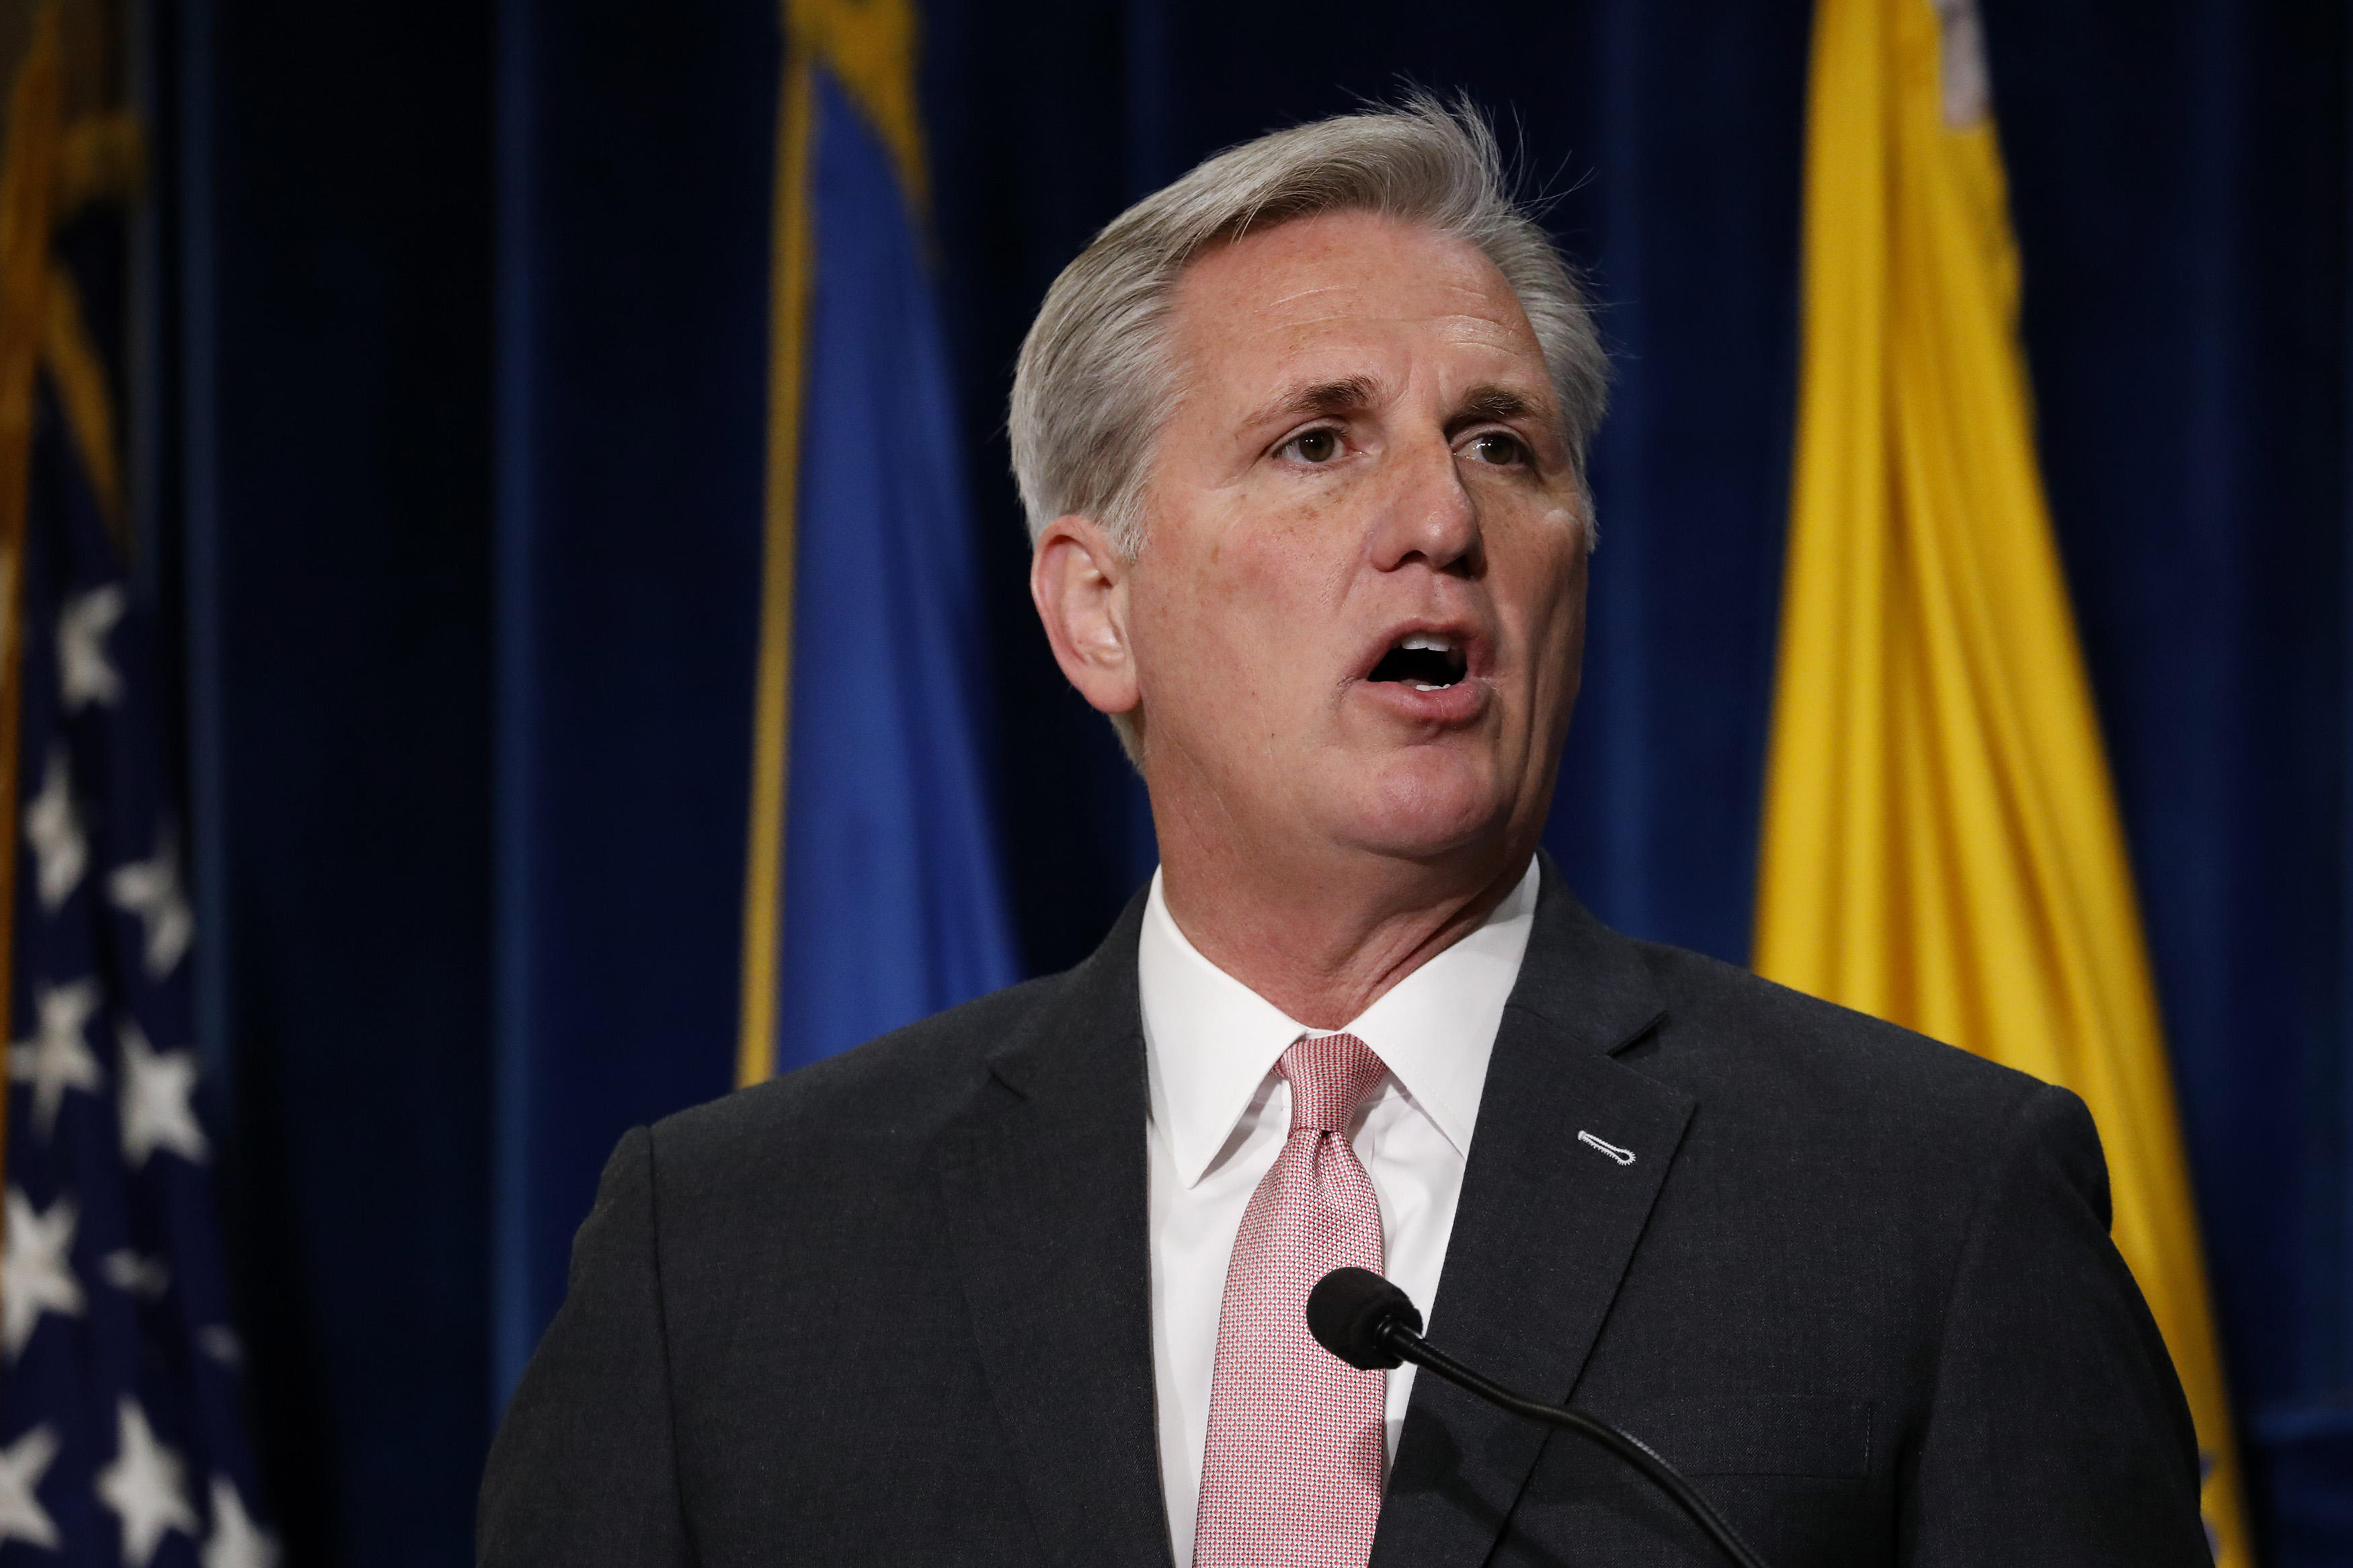 Kevin McCarthy elected House minority leader and Steve Scalise will be minority whip - CBS News